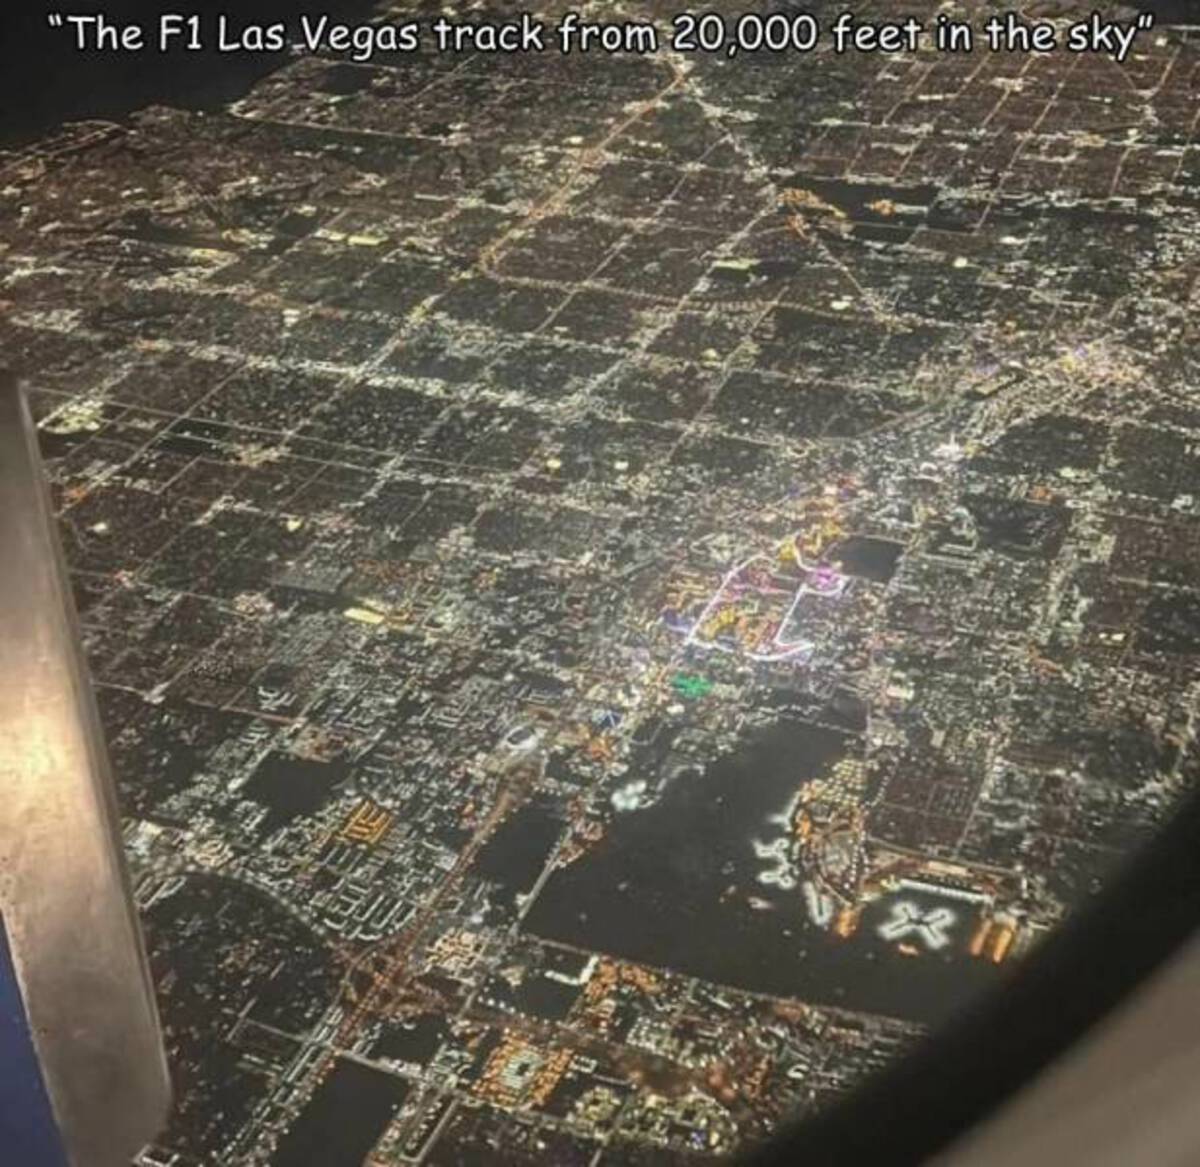 aerial photography - "The F1 Las Vegas track from 20,000 feet in the sky' Op 23 17